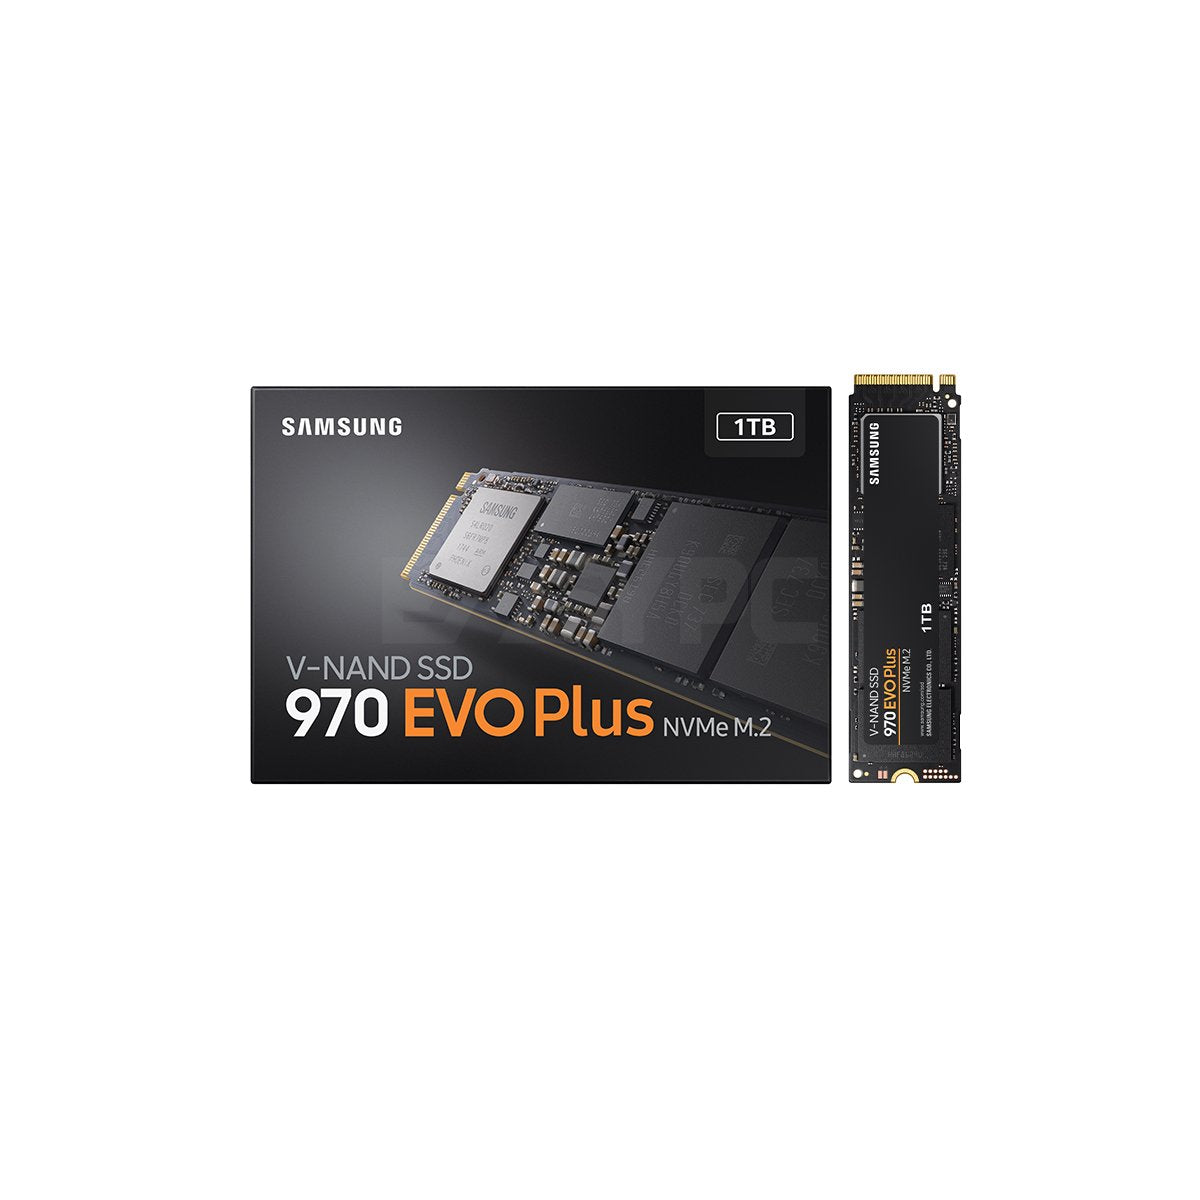 Samsung's 970 EVO SSDs Offer Stellar Performance With a Price to Match